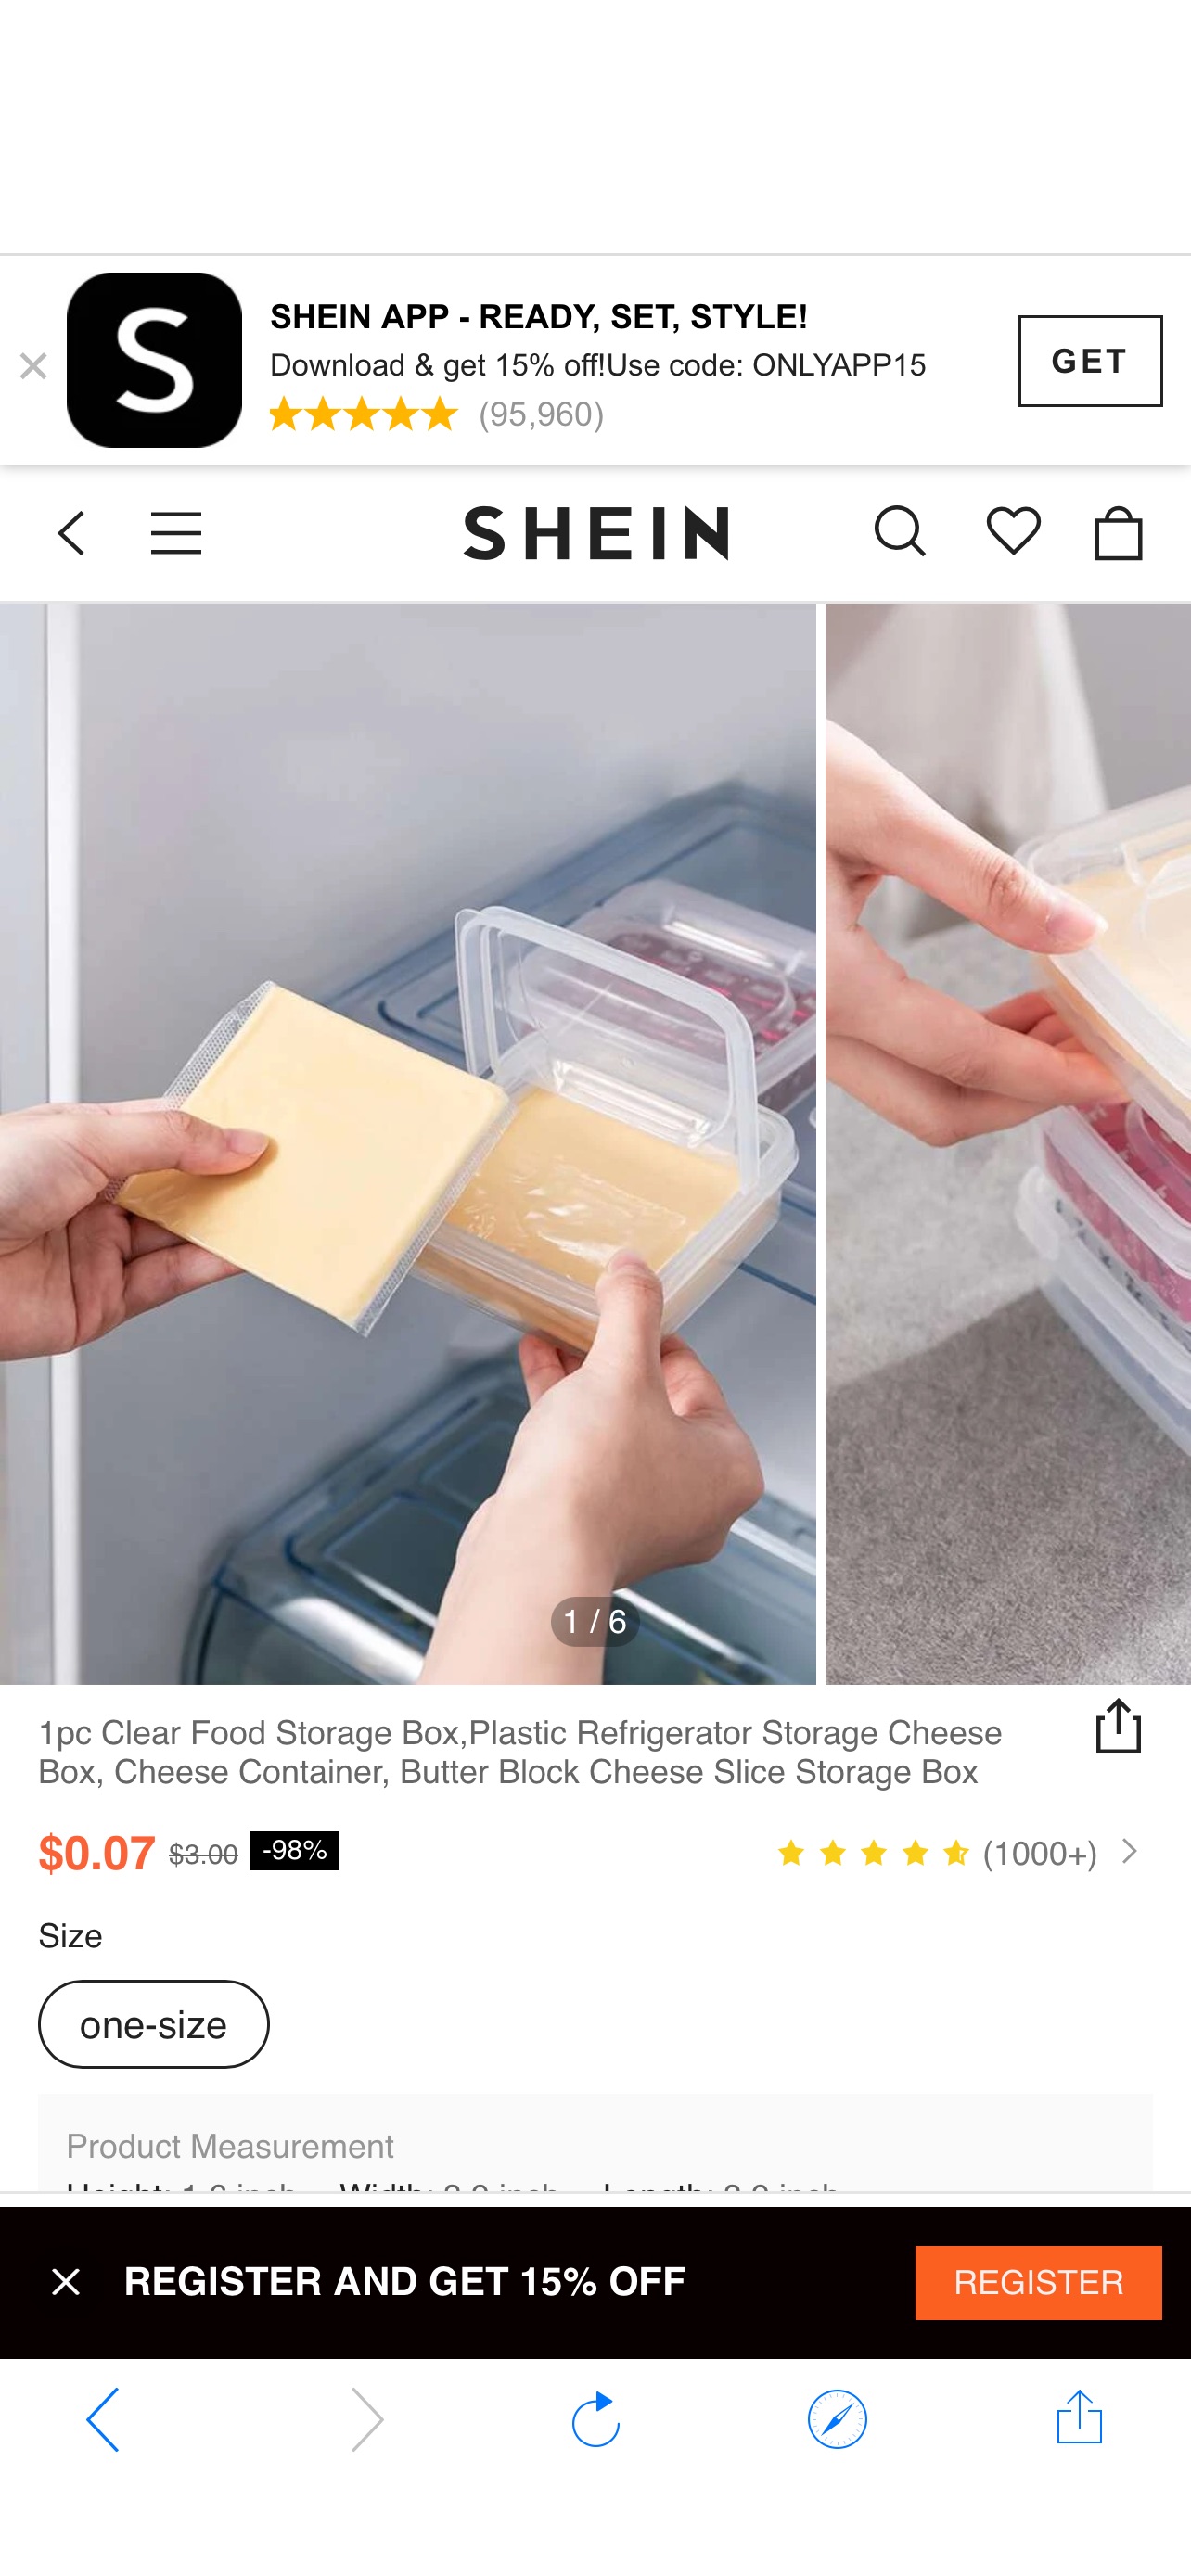 1pc Clear Food Storage Box,Plastic Refrigerator Storage Cheese Box, Cheese Container, Butter Block Cheese Slice Storage Box | SHEIN USA